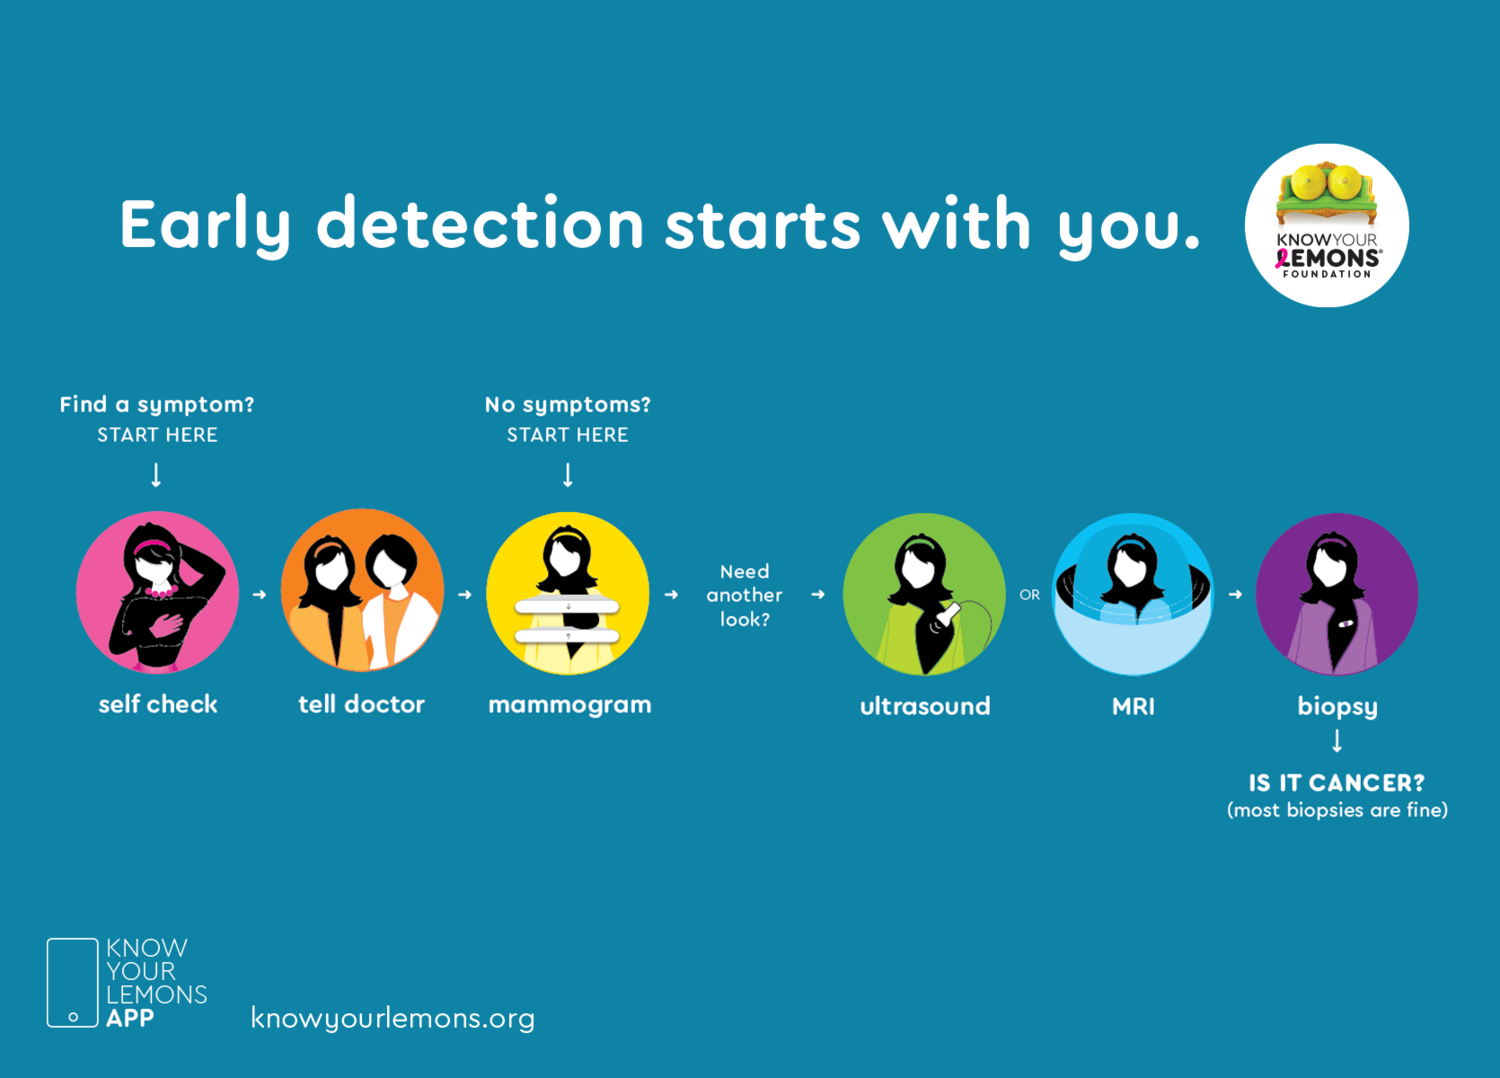 Early detection starts with you